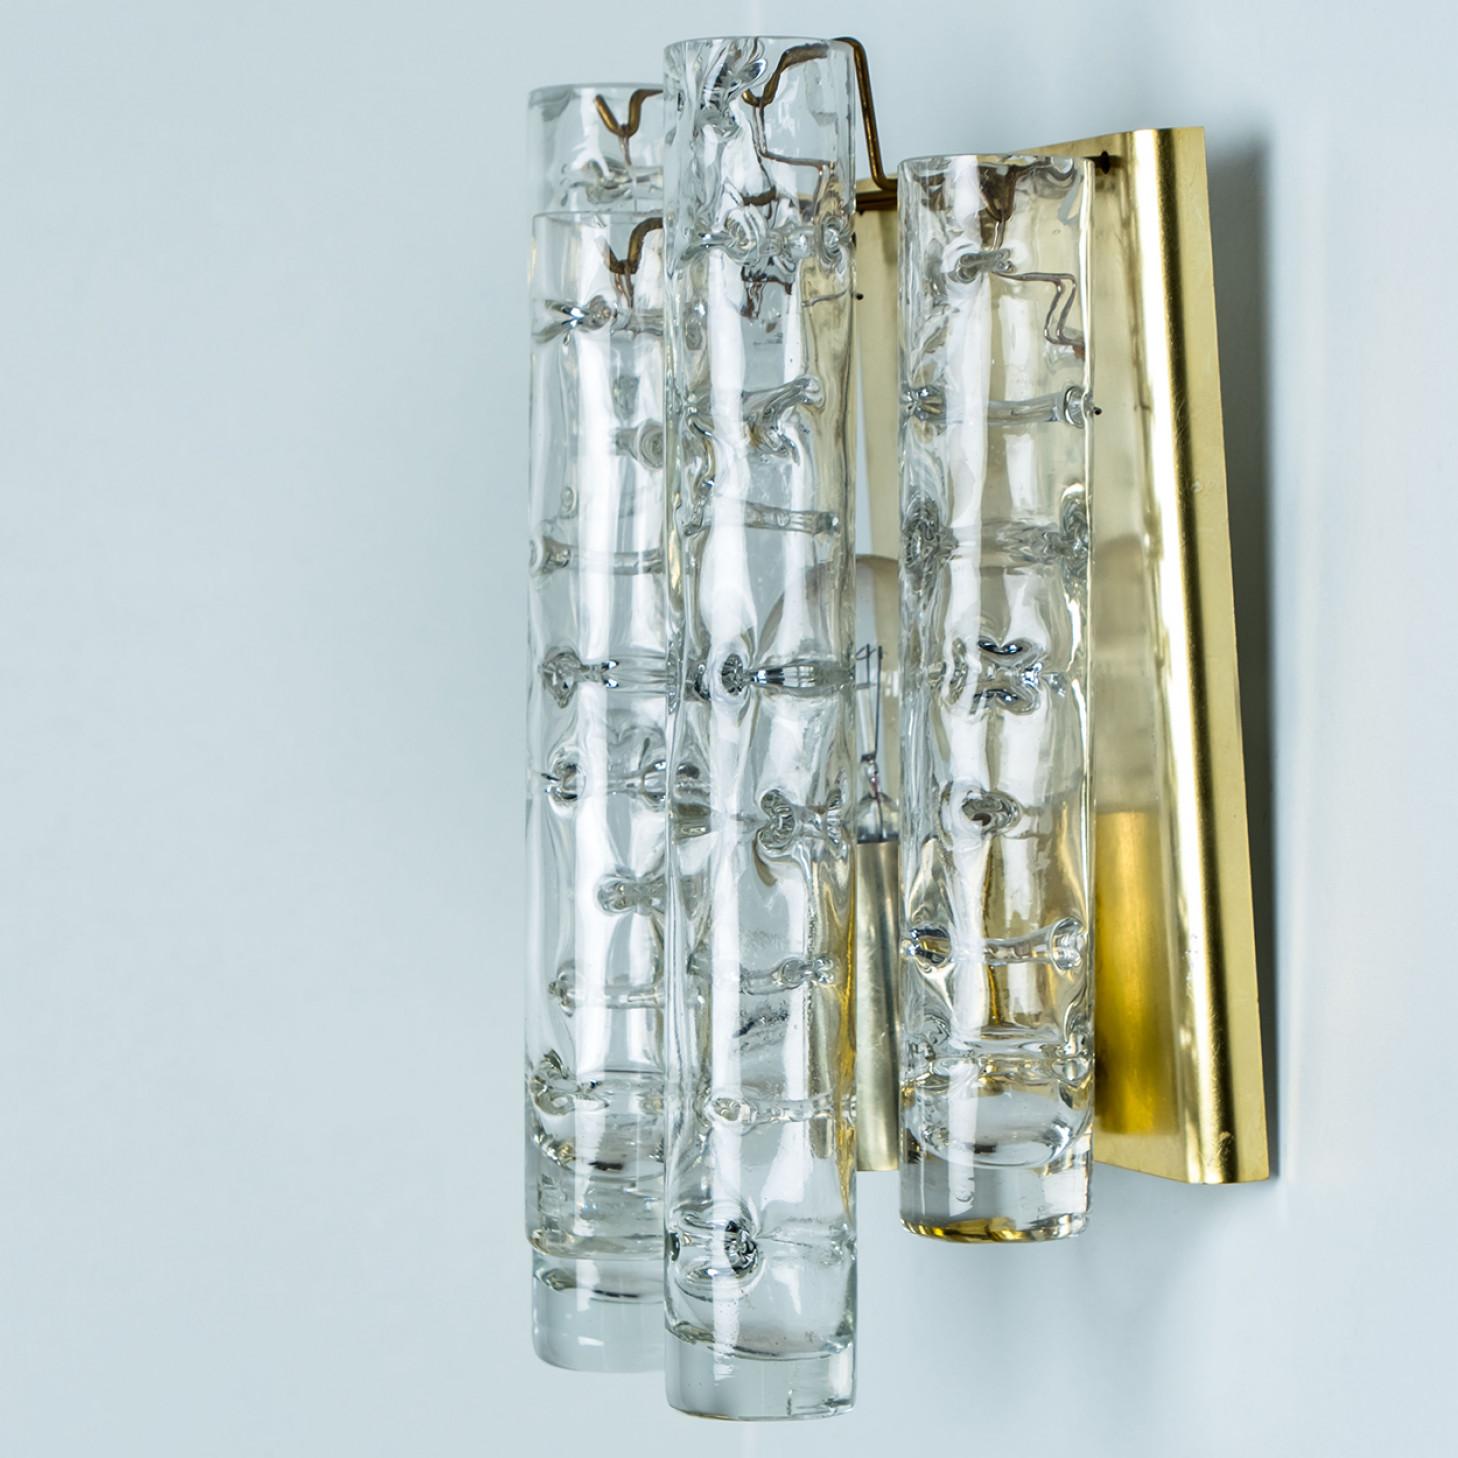 Mid-Century Modern Pair of Structured Tubes Wall Lights by Doria Leuchten, 1960s For Sale